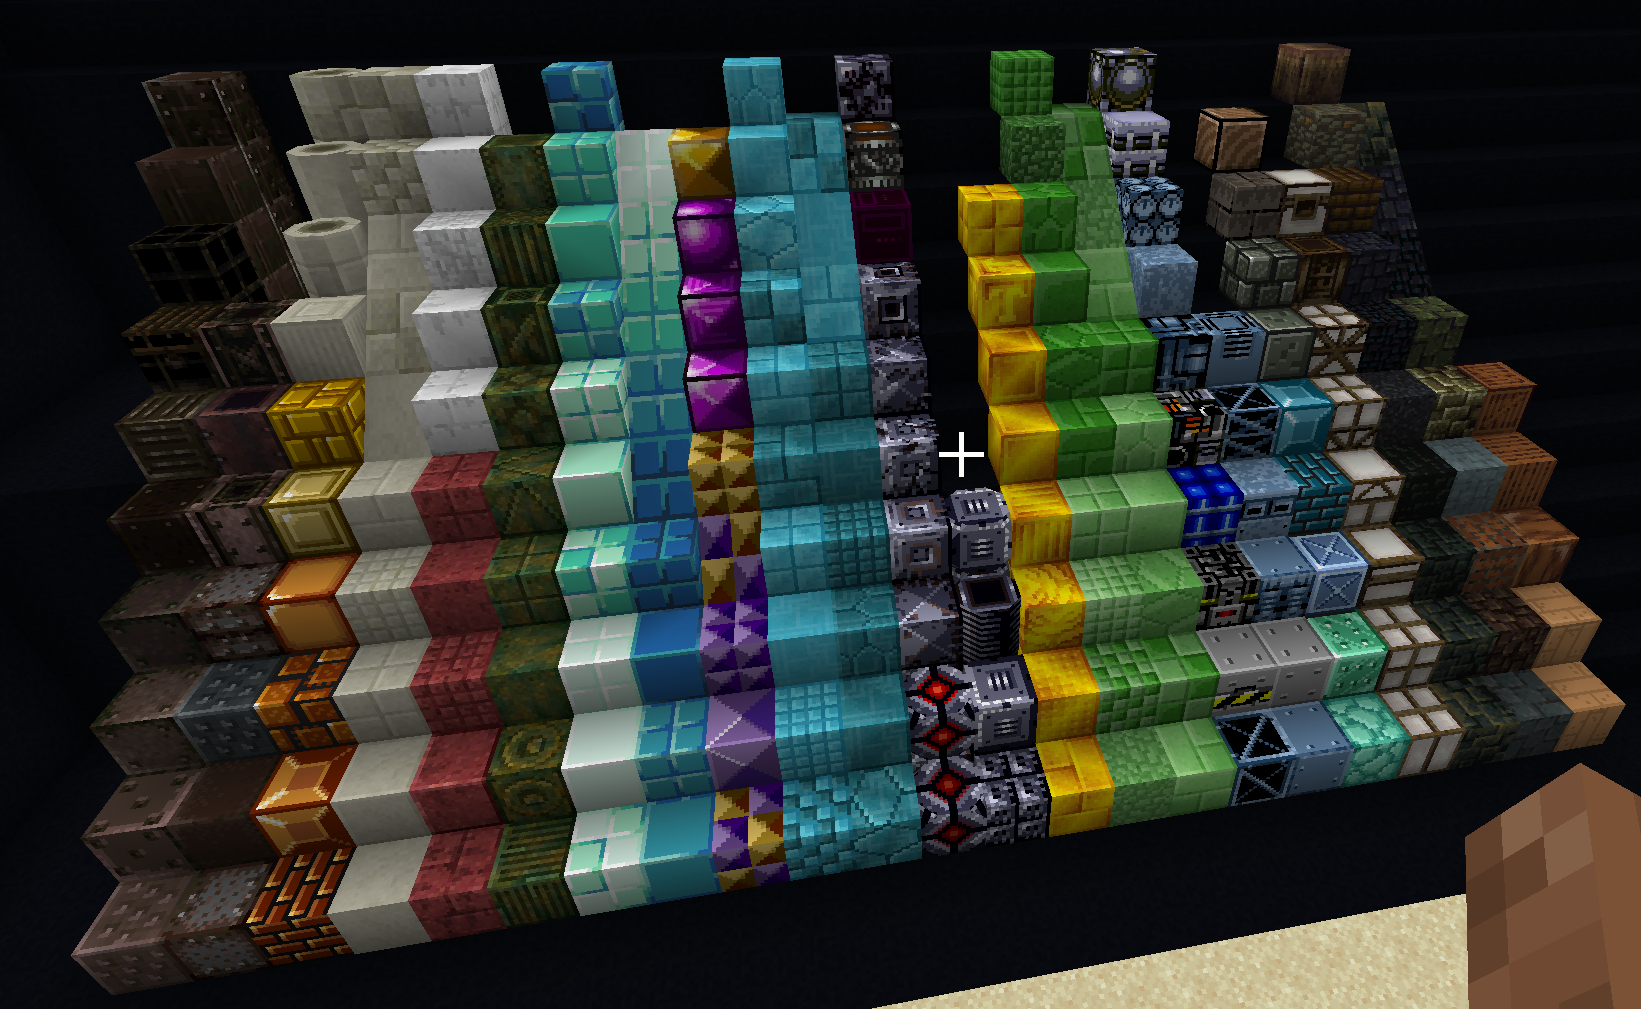 Conventional Cubes has over 200 blocks to choose from